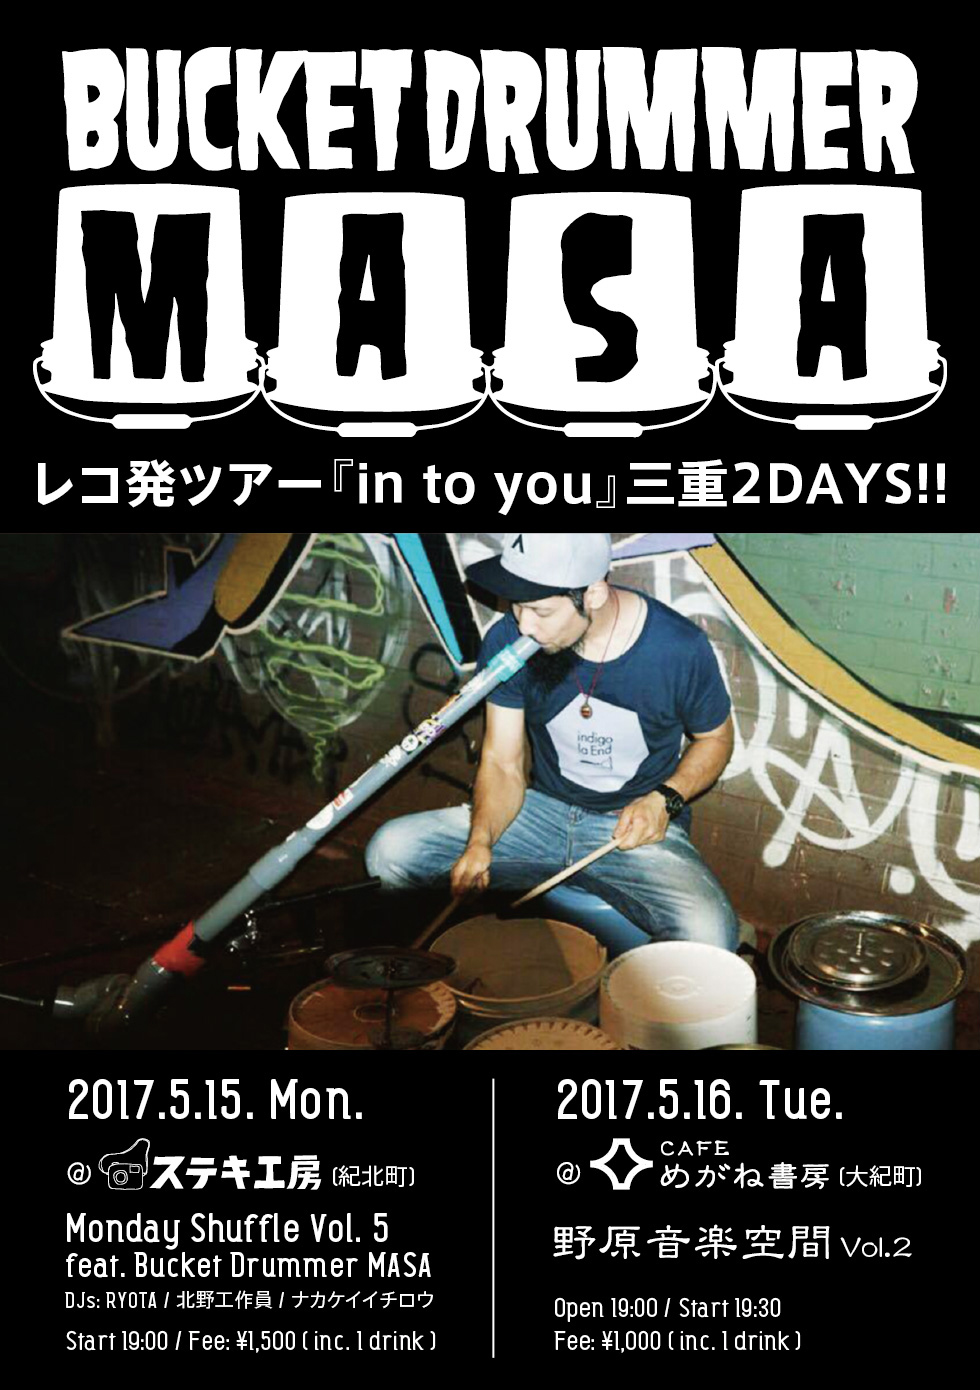 BUCKET DRUMMER MASA レコ発ツアー「in to you』三重2DAYS!!